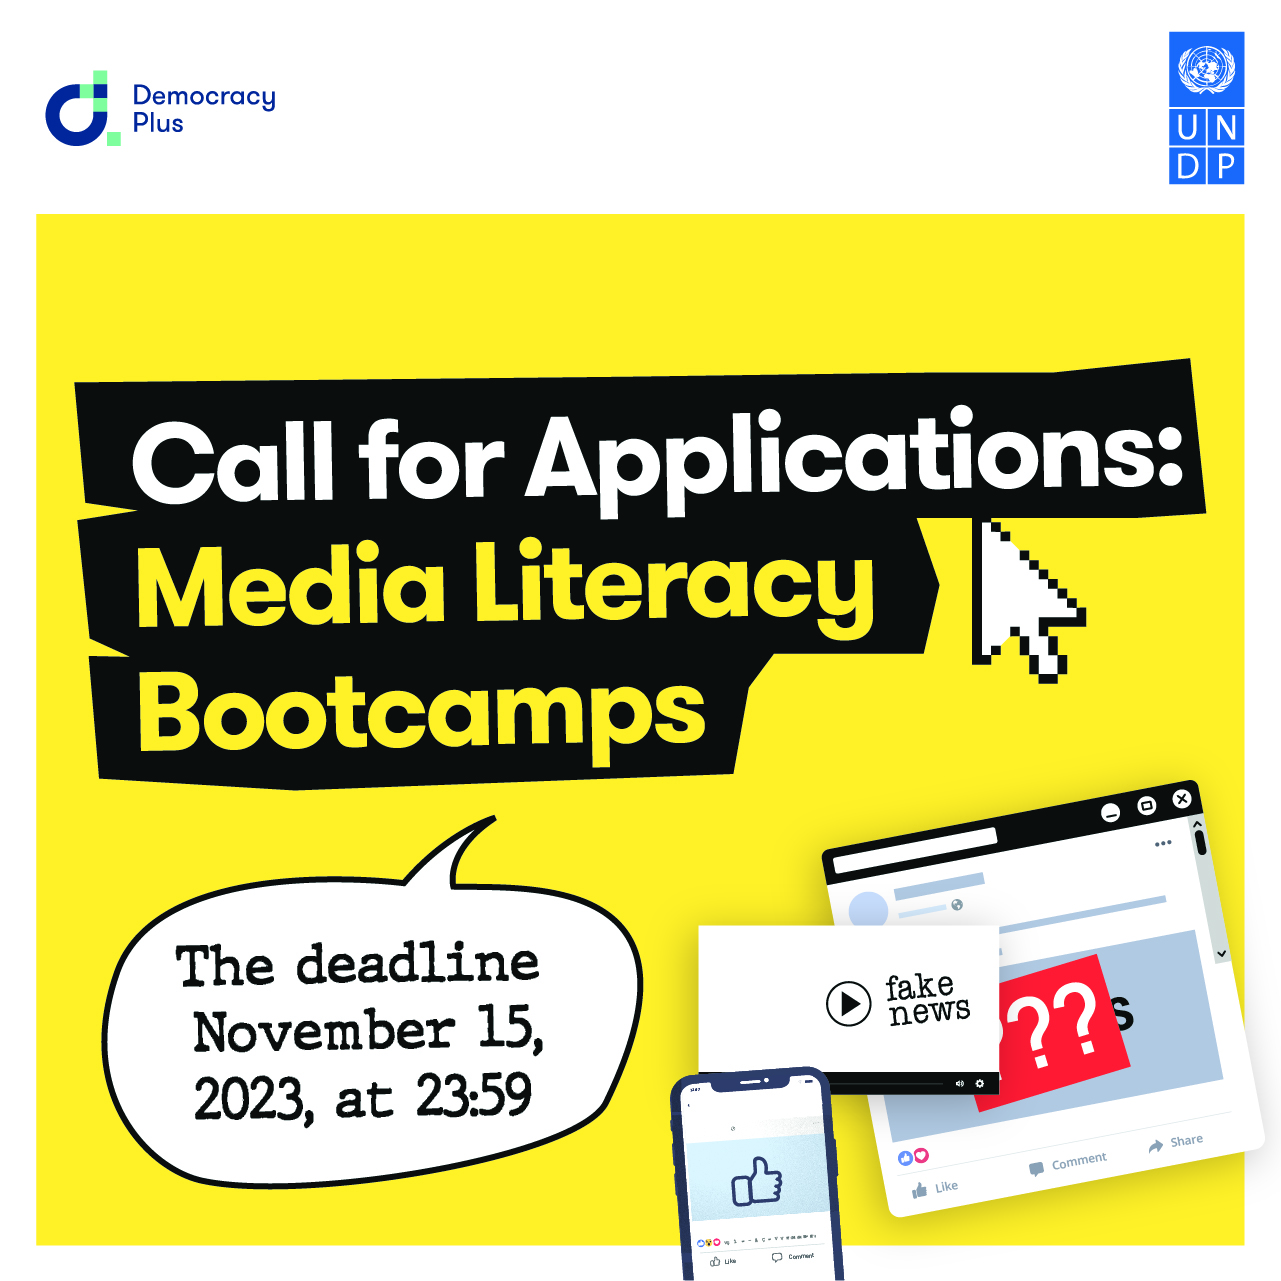 Call for Applications: Media Literacy Bootcamps